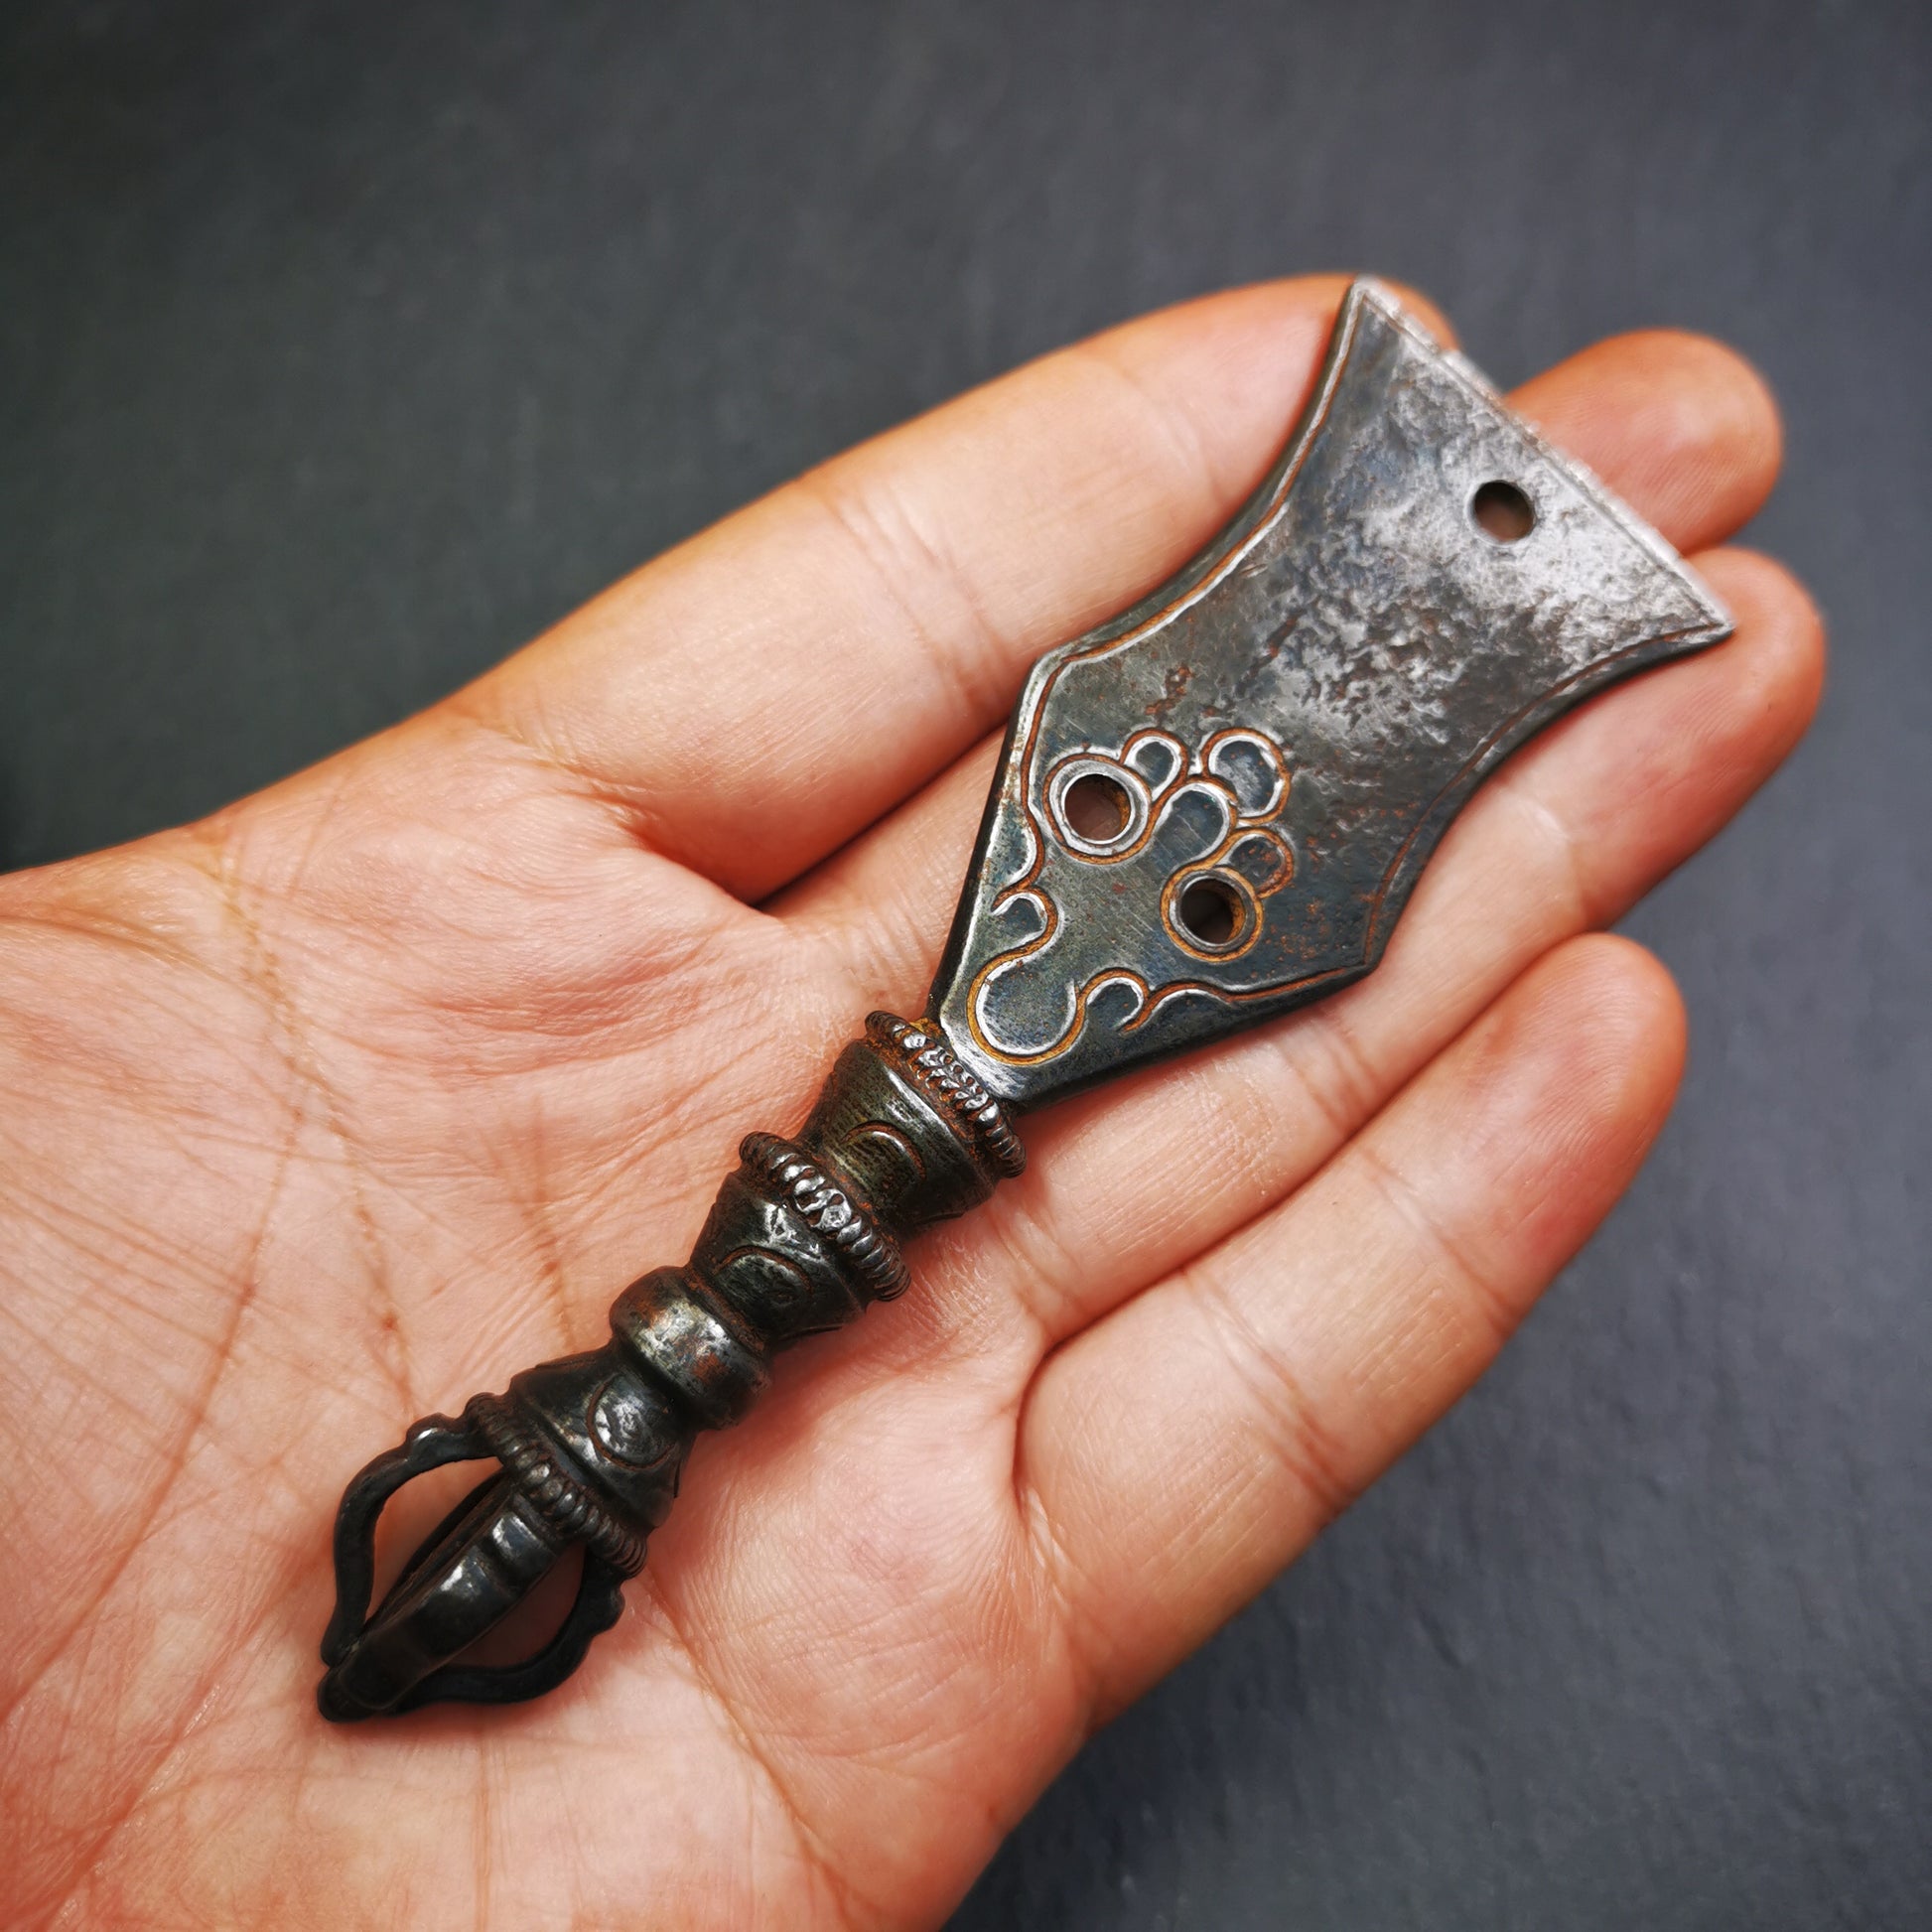 This old handmade kartika was handmade by Tibetan craftsmen. It is made of cold iron,inlaid copper wire, blcak color,the upper part is a half vajra, and the lower part is a flat kartika knife,3.9 inches long.